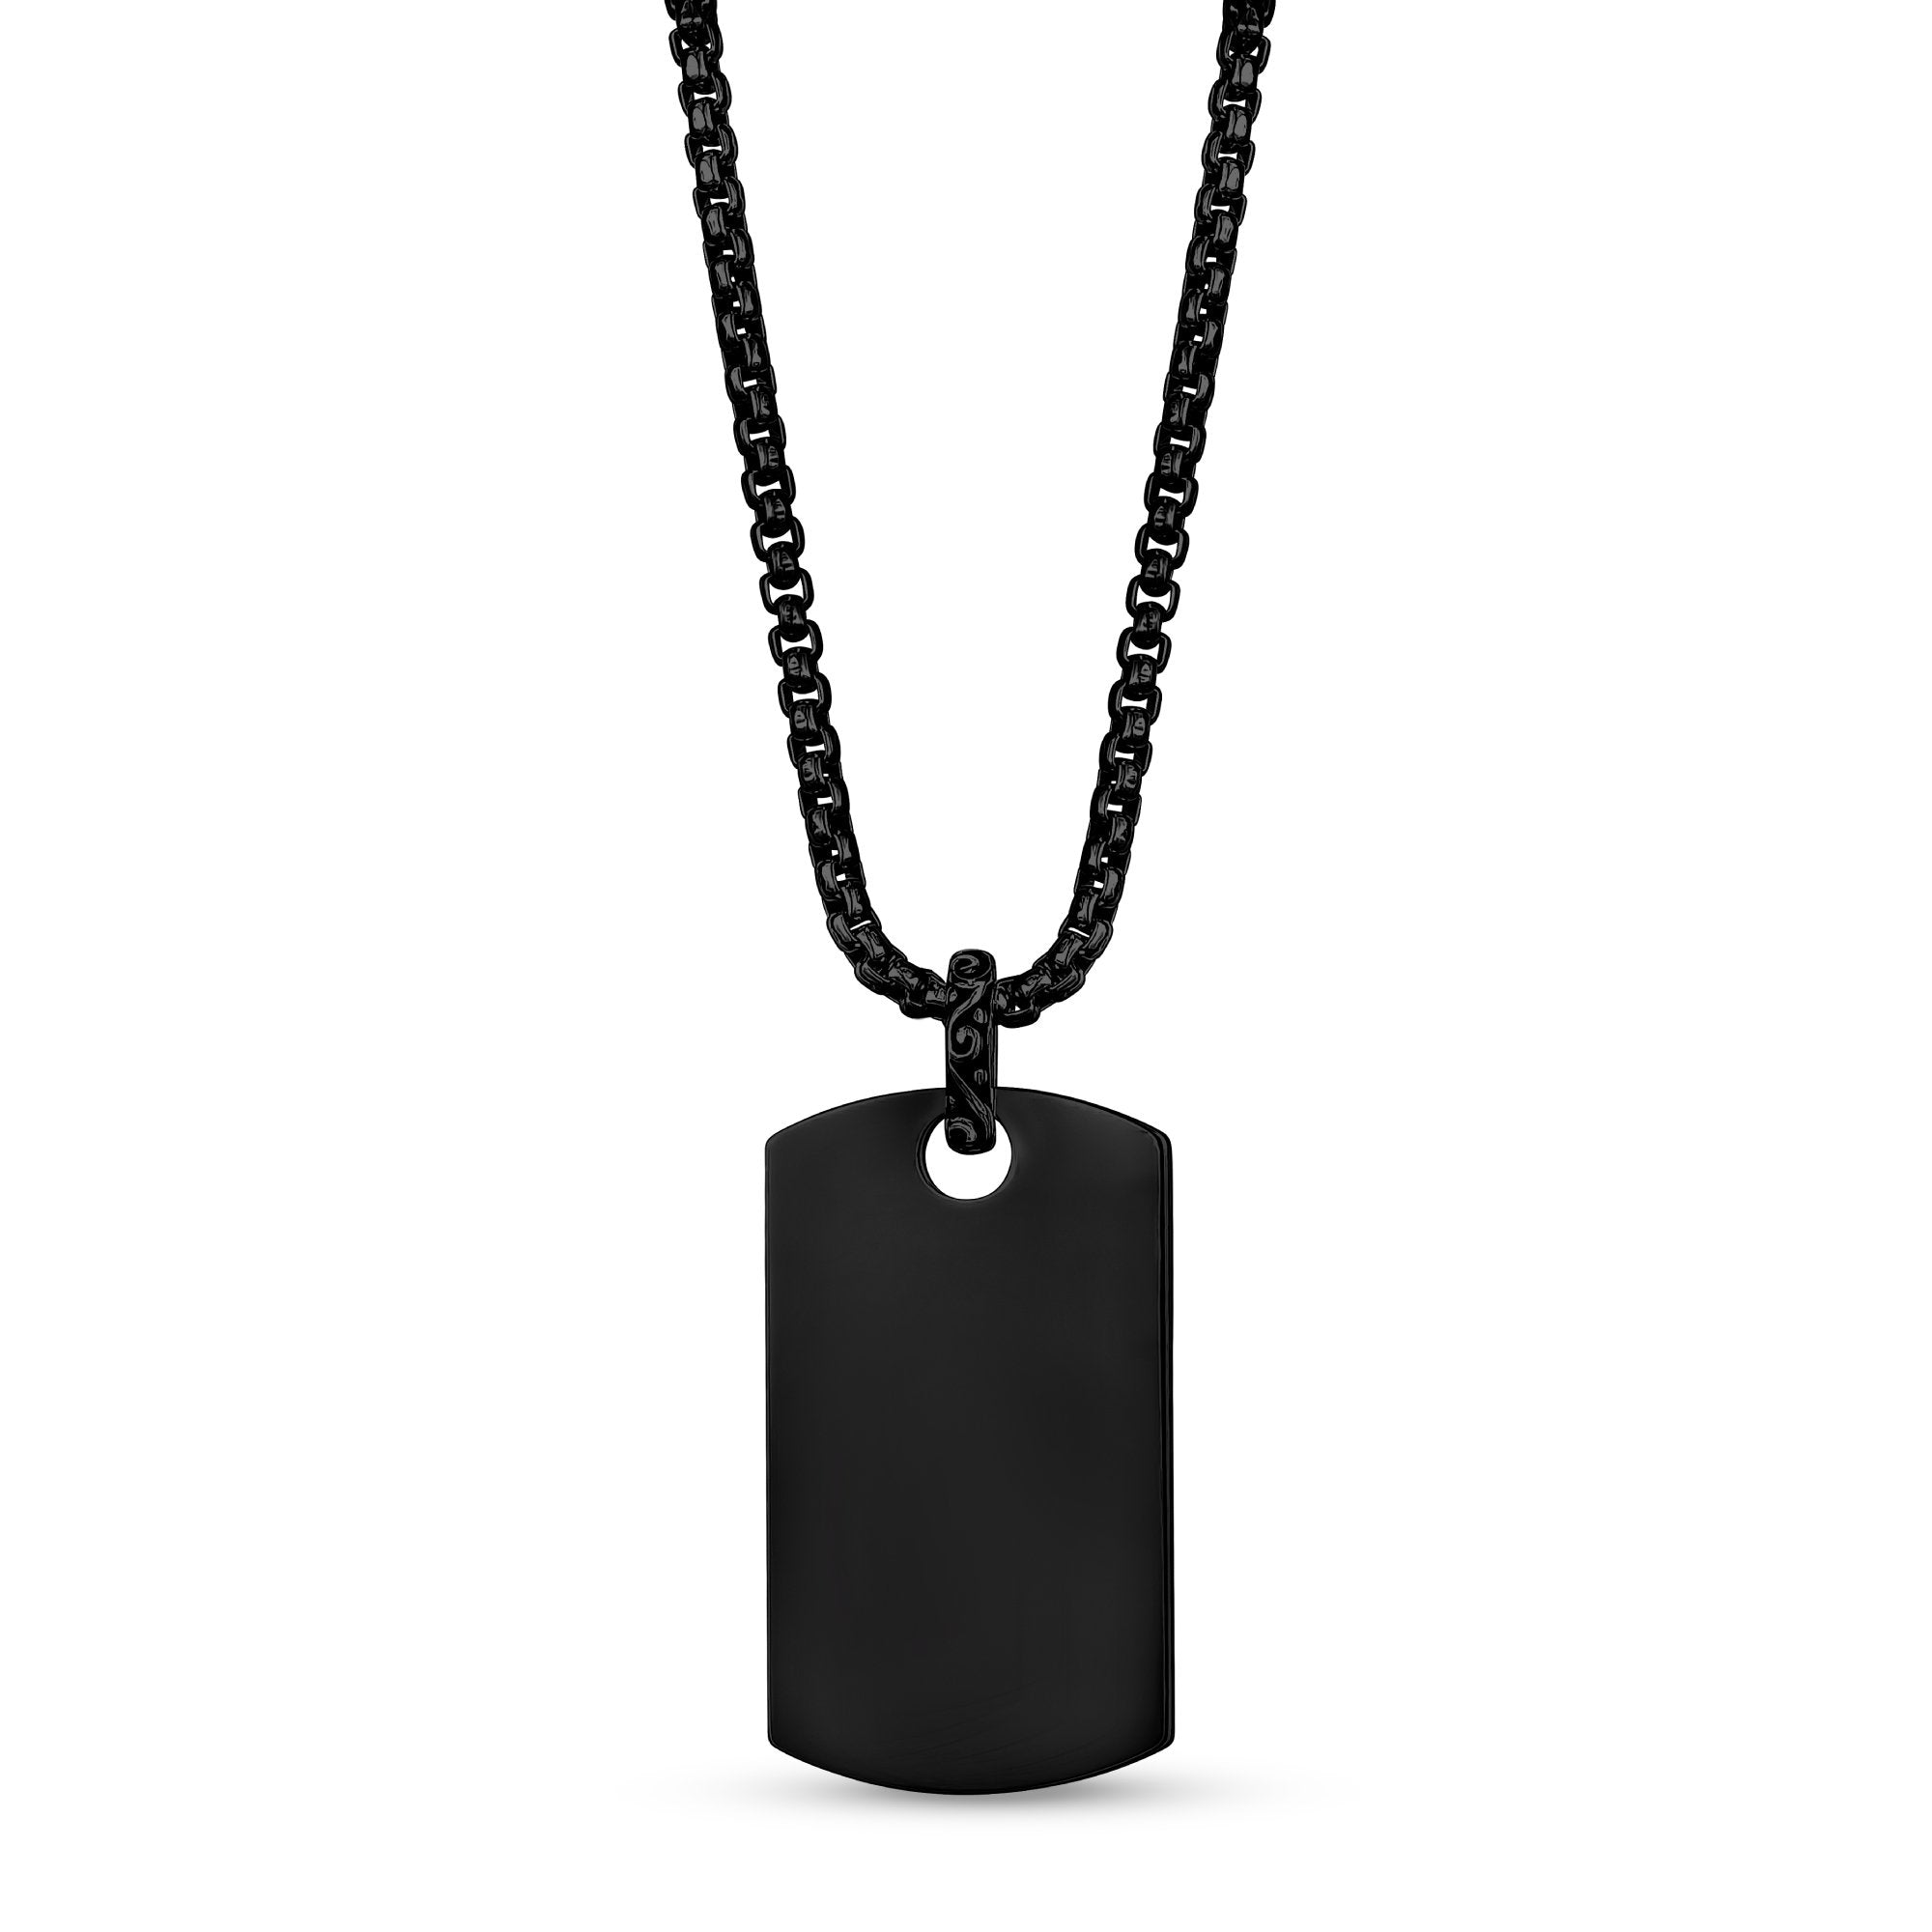 Personalized Black Stainless Steel Dog Tag & Cross Chain Necklace